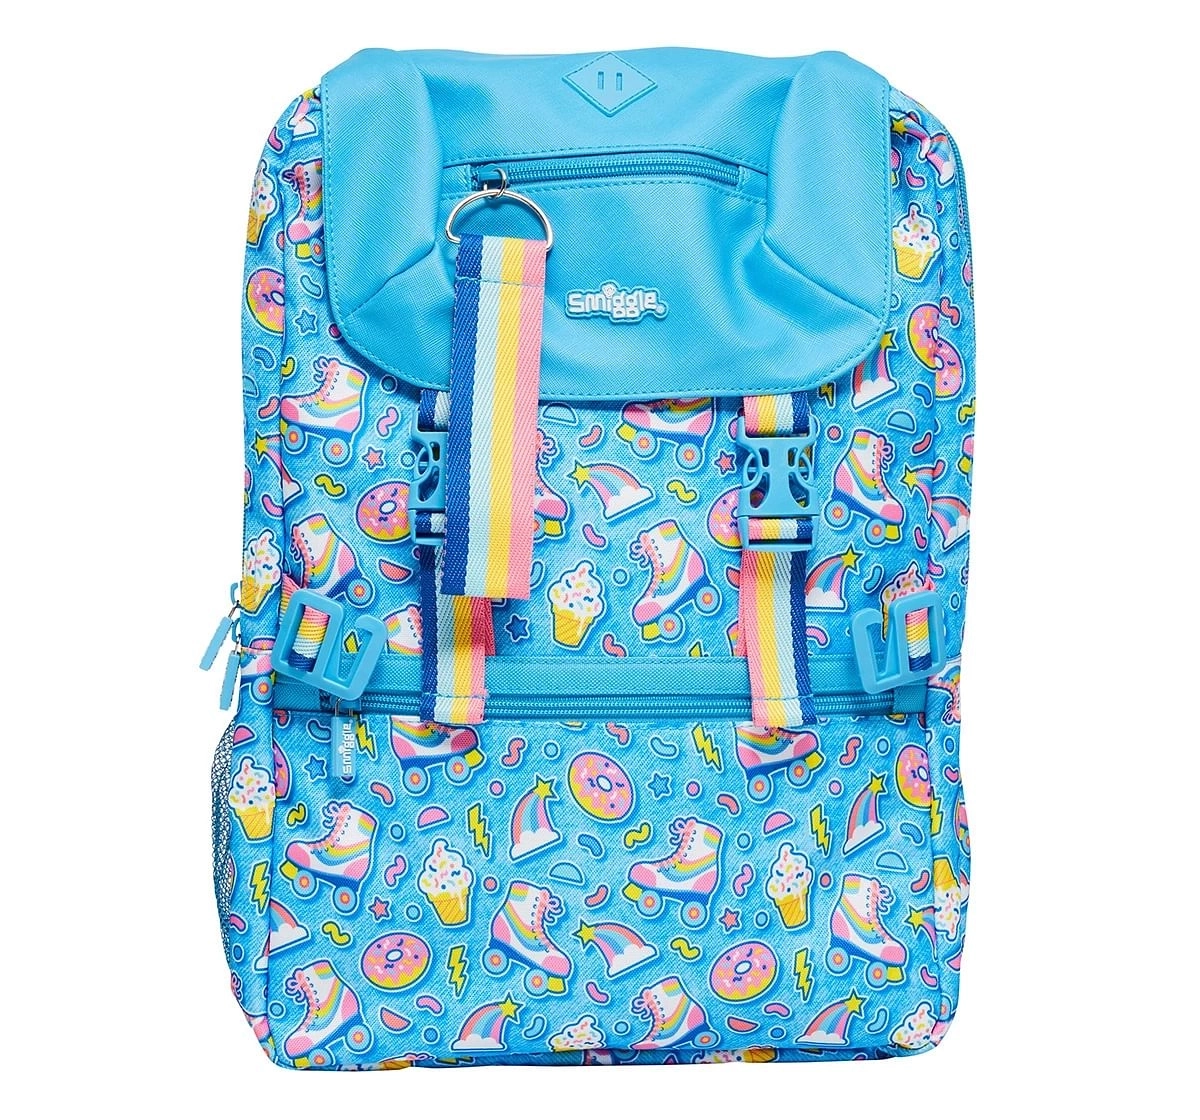 Smiggle Backpack Unicorn Print Blue 16 Inch Online in India, Buy at Best  Price from Firstcry.com - 15311498